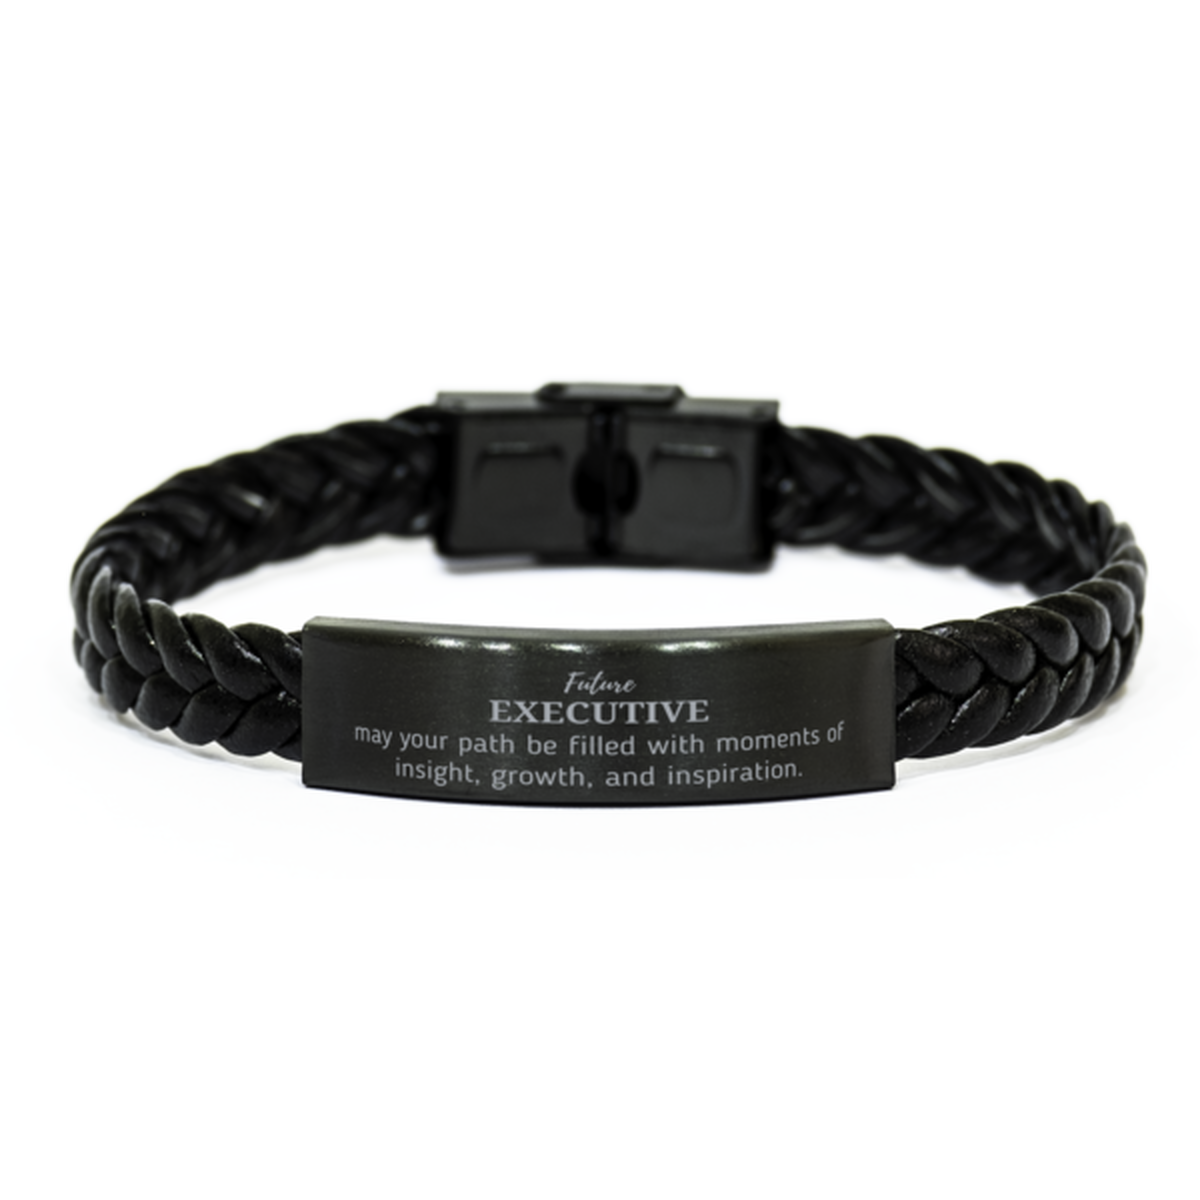 Future Executive Gifts, May your path be filled with moments of insight, Graduation Gifts for New Executive, Christmas Unique Braided Leather Bracelet For Men, Women, Friends